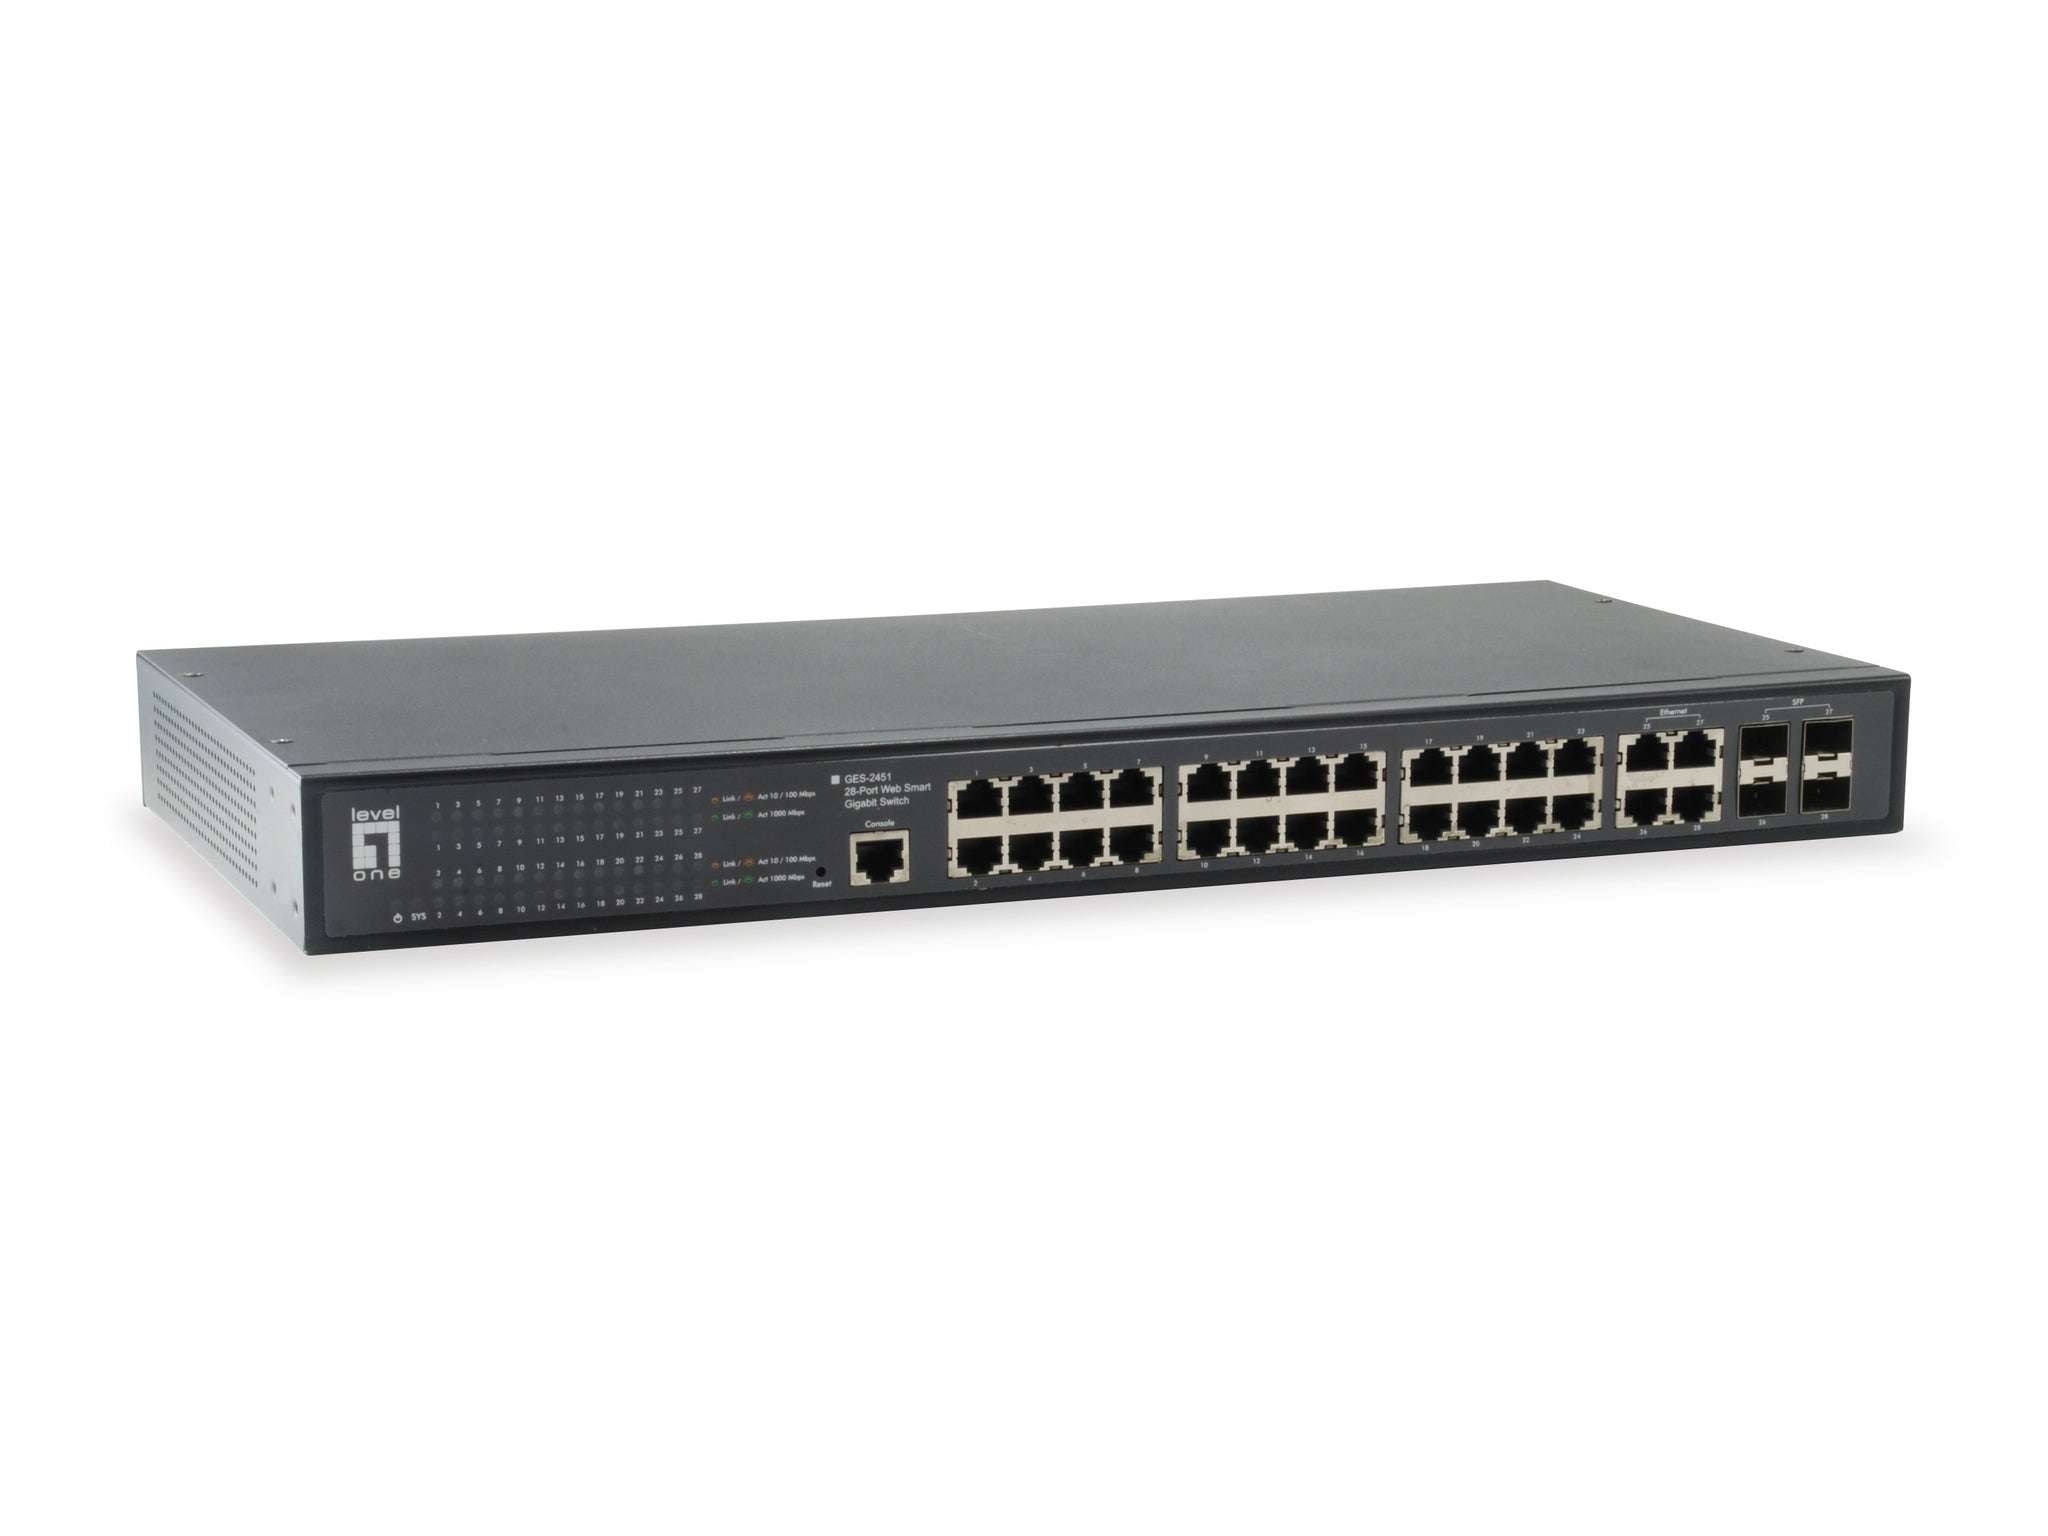 GES-2451 24GE W/4 SHARED SFP WEB SMART SWITCH